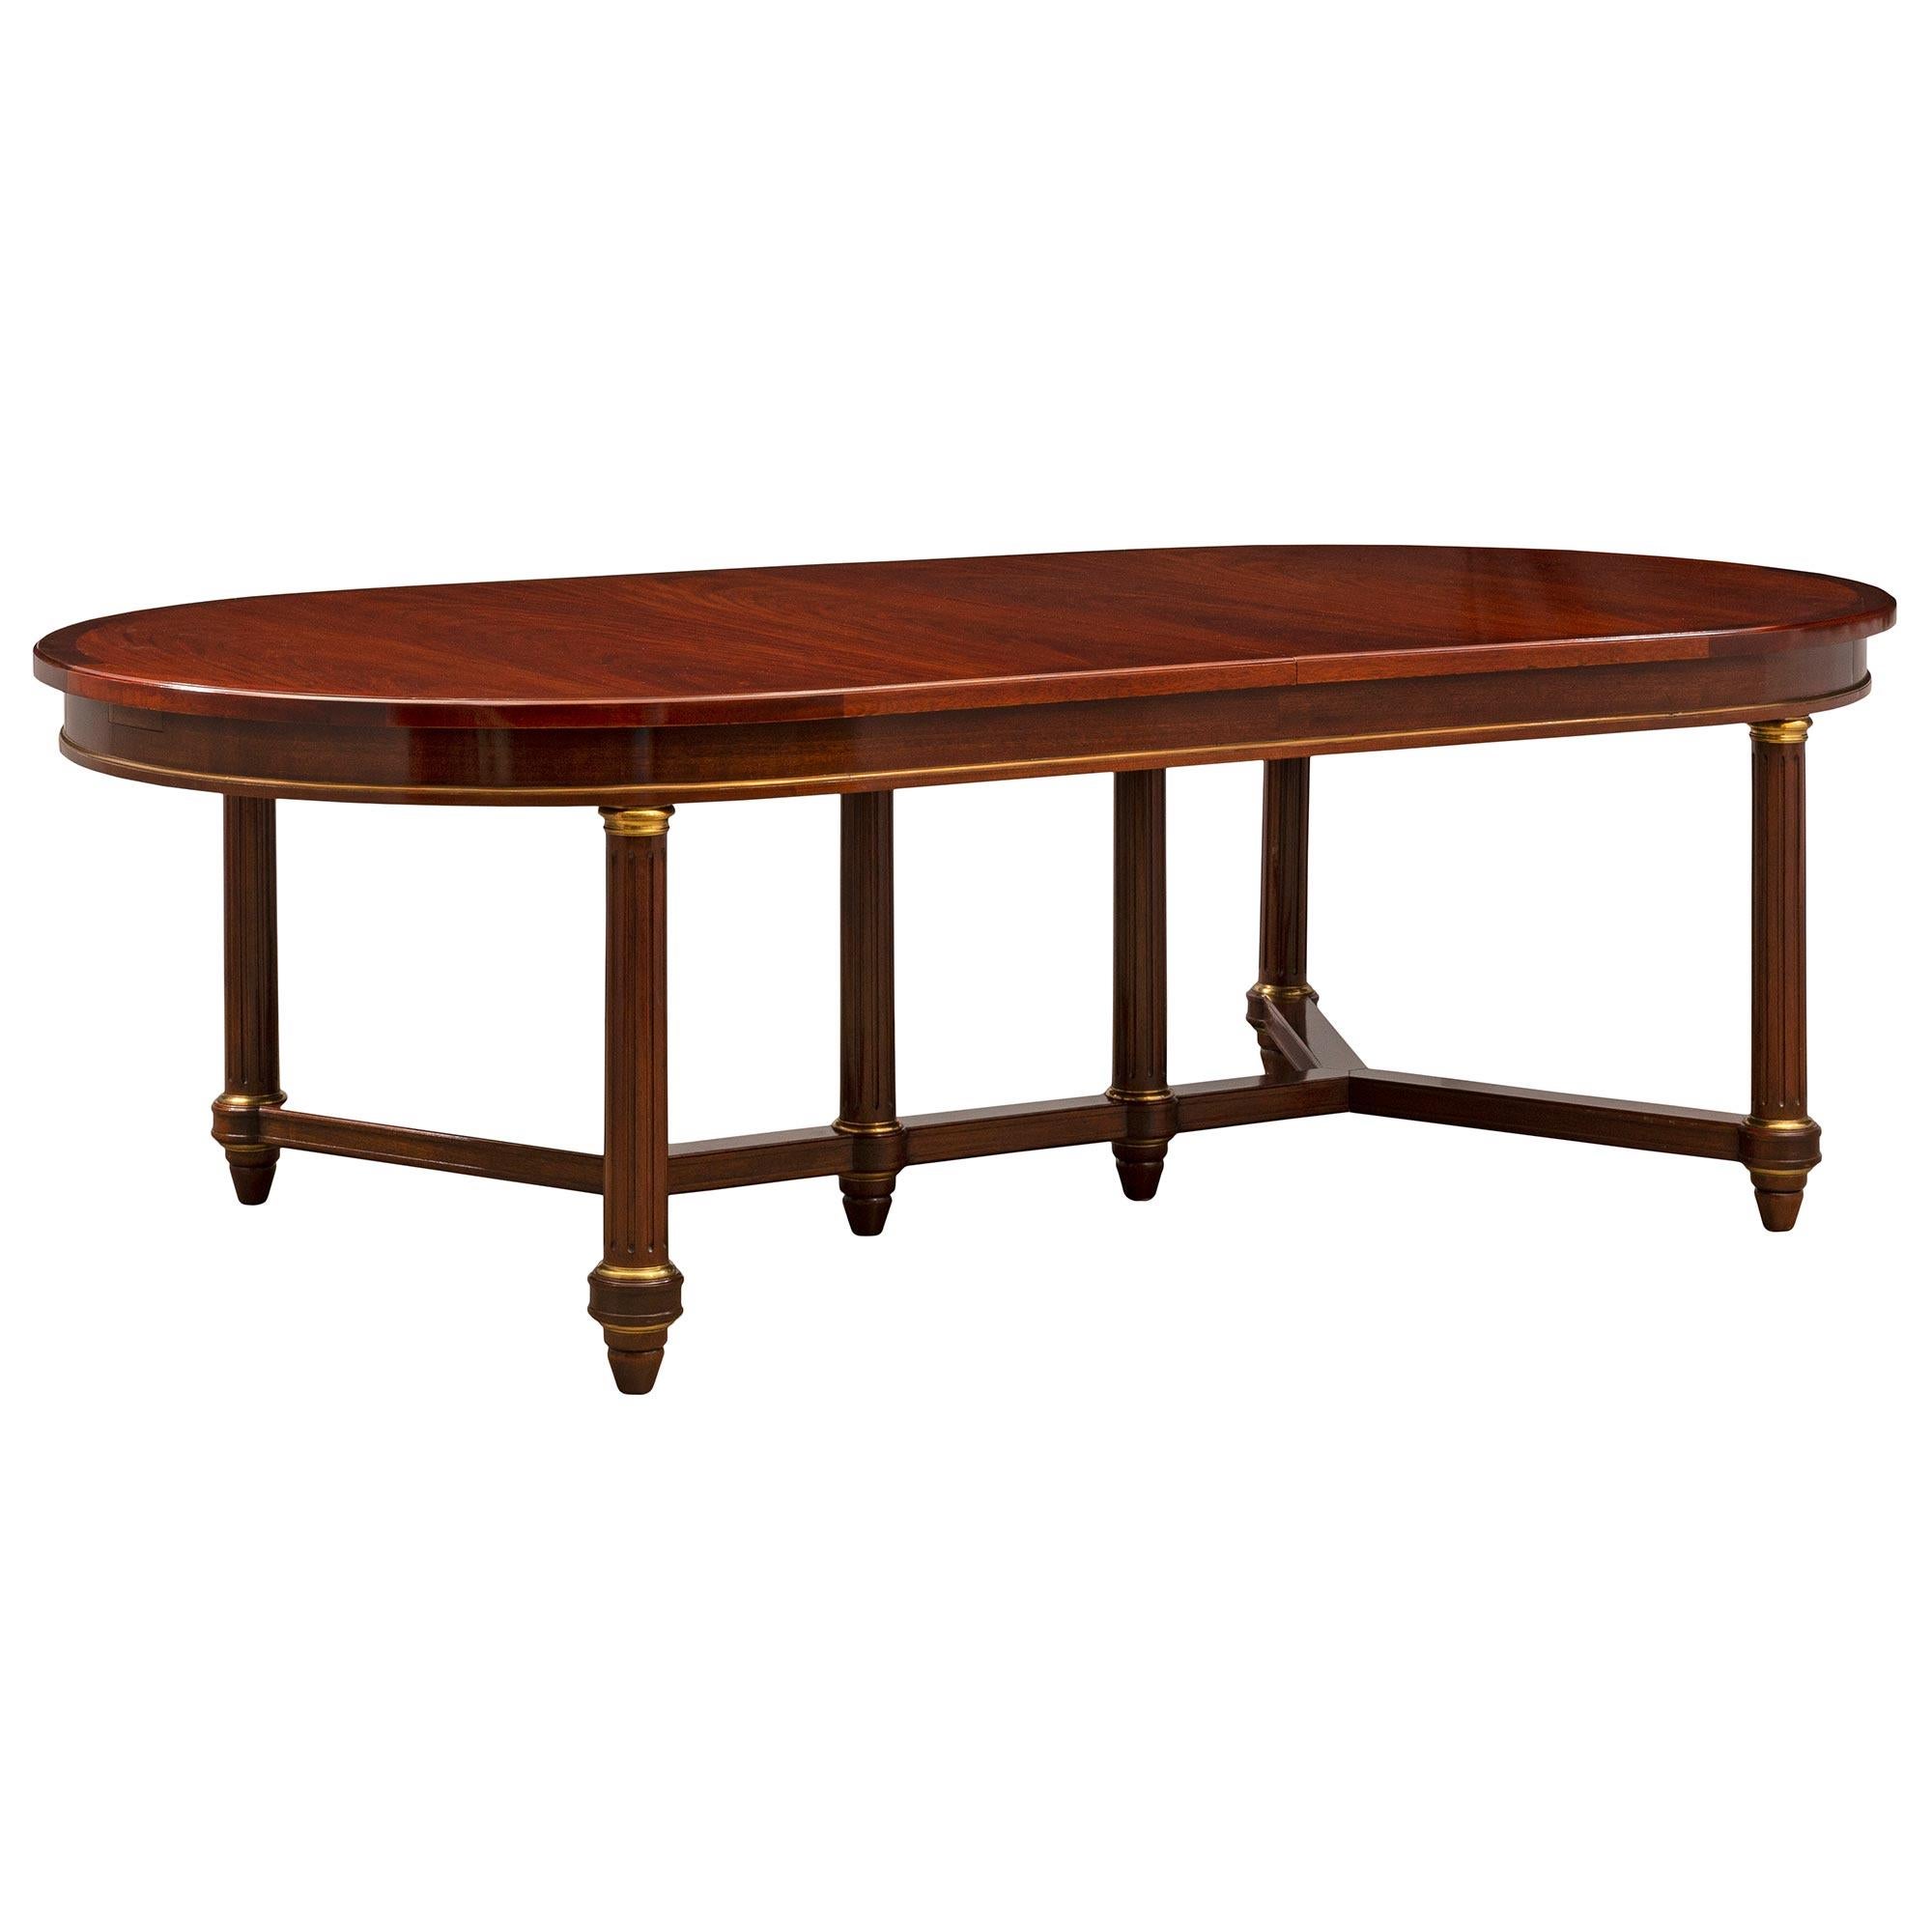 French Turn of the Century Empire St. Flamed Mahogany and Ormolu Dining Table For Sale 1